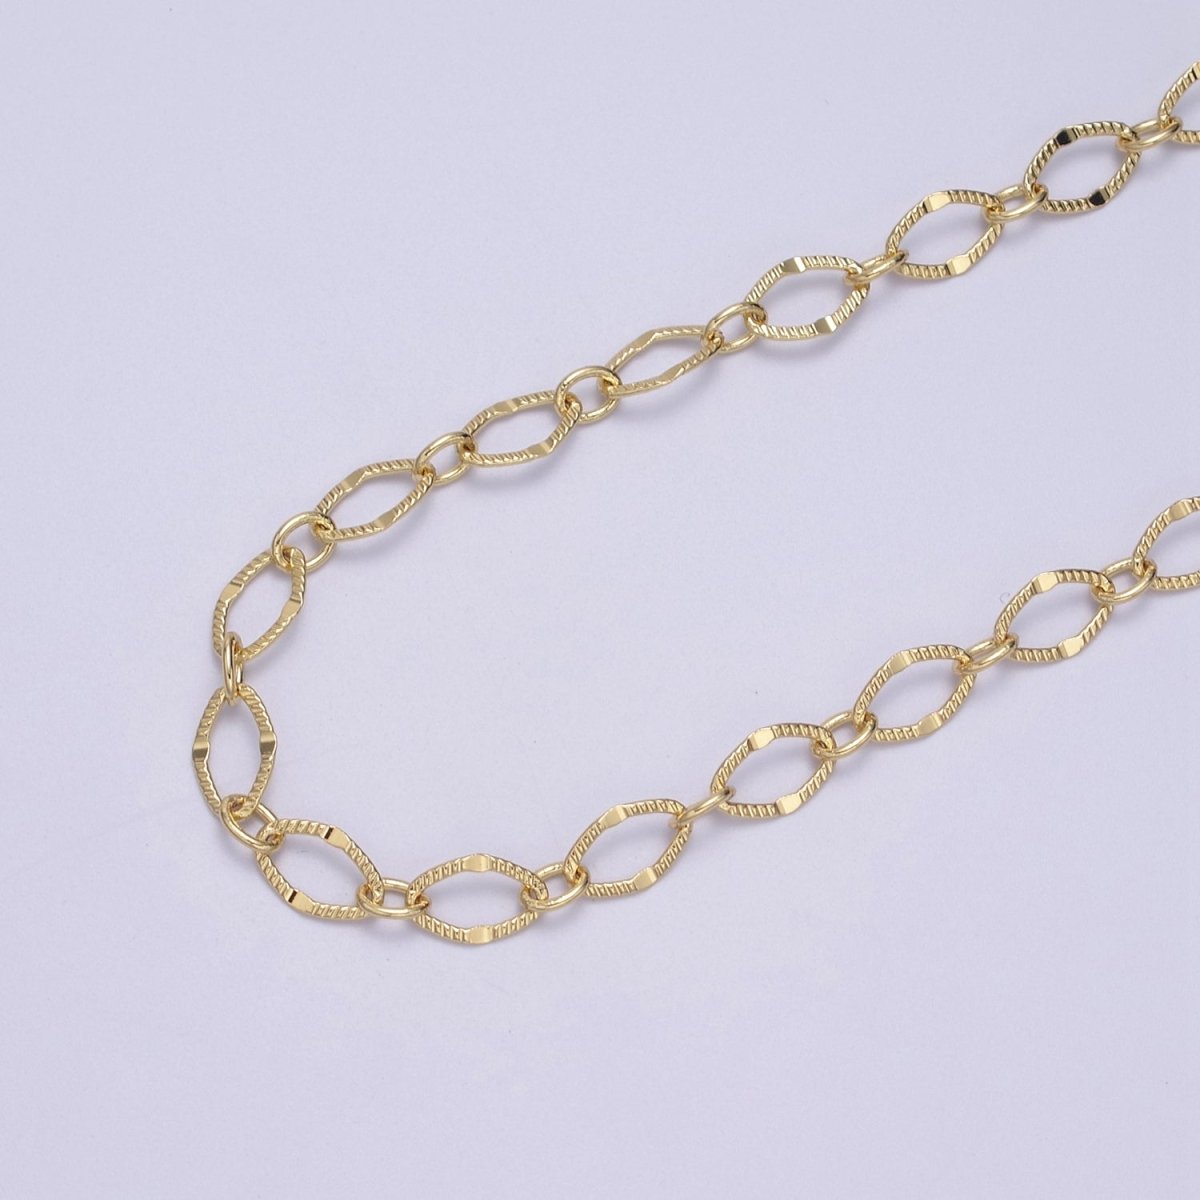 24K Gold Filled 6mm Width Textured Cable Chain, Silver Unique Cable Wholesale Bulk Chain For Jewelry Making | ROLL-596, ROLL-597 Clearance Pricing - DLUXCA